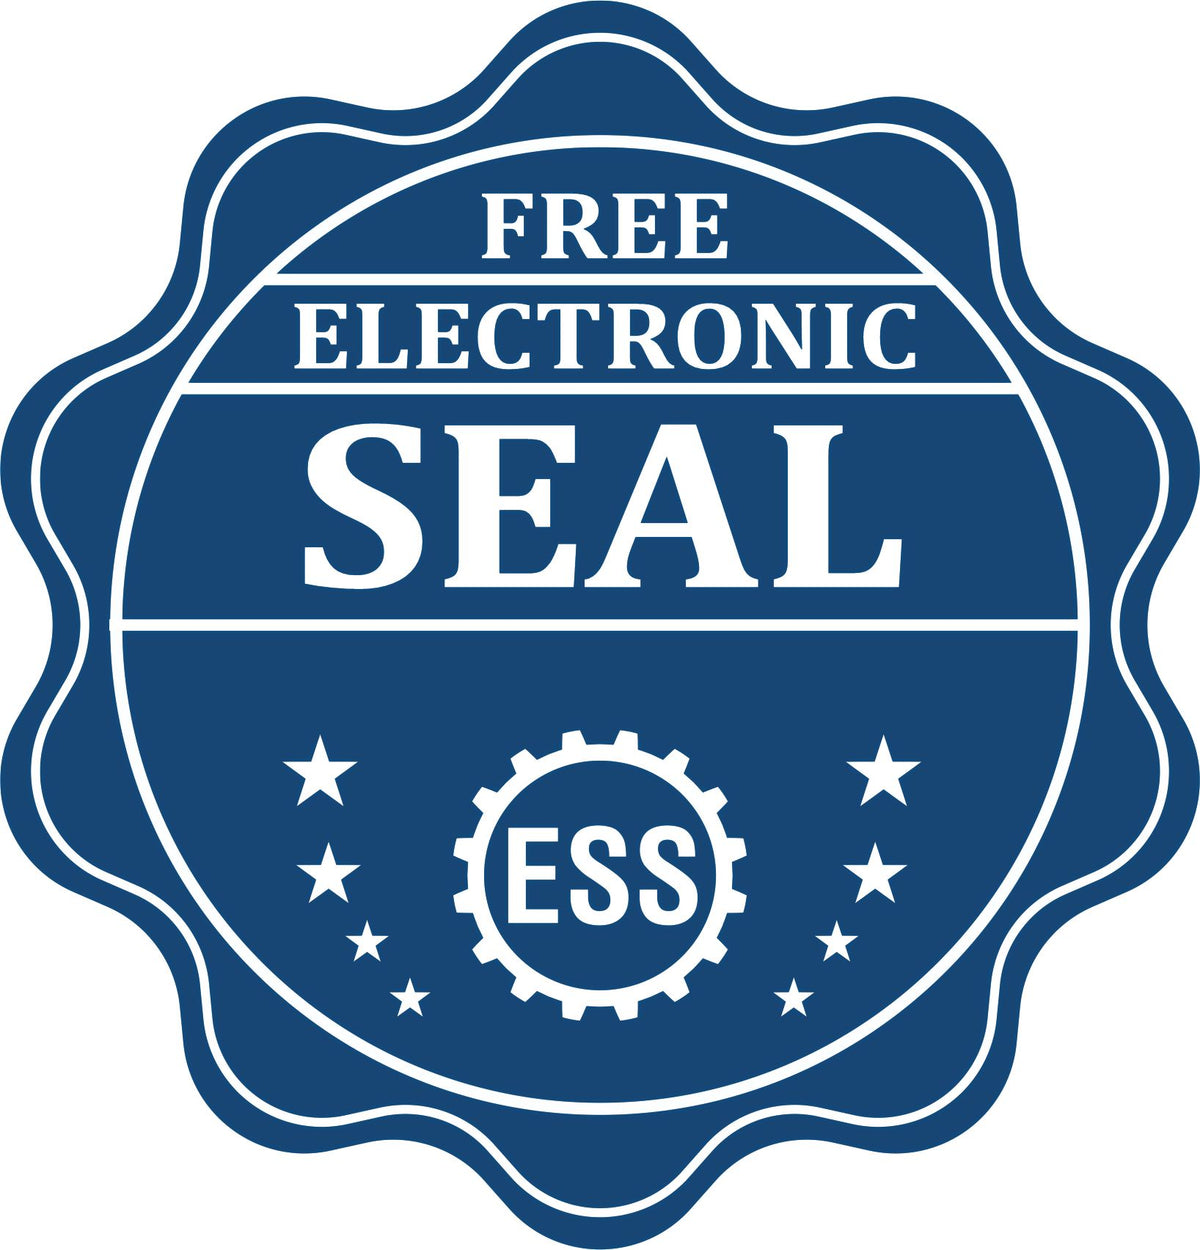 A badge showing a free electronic seal for the Handheld New Hampshire Professional Engineer Embosser with stars and the ESS gear on the emblem.